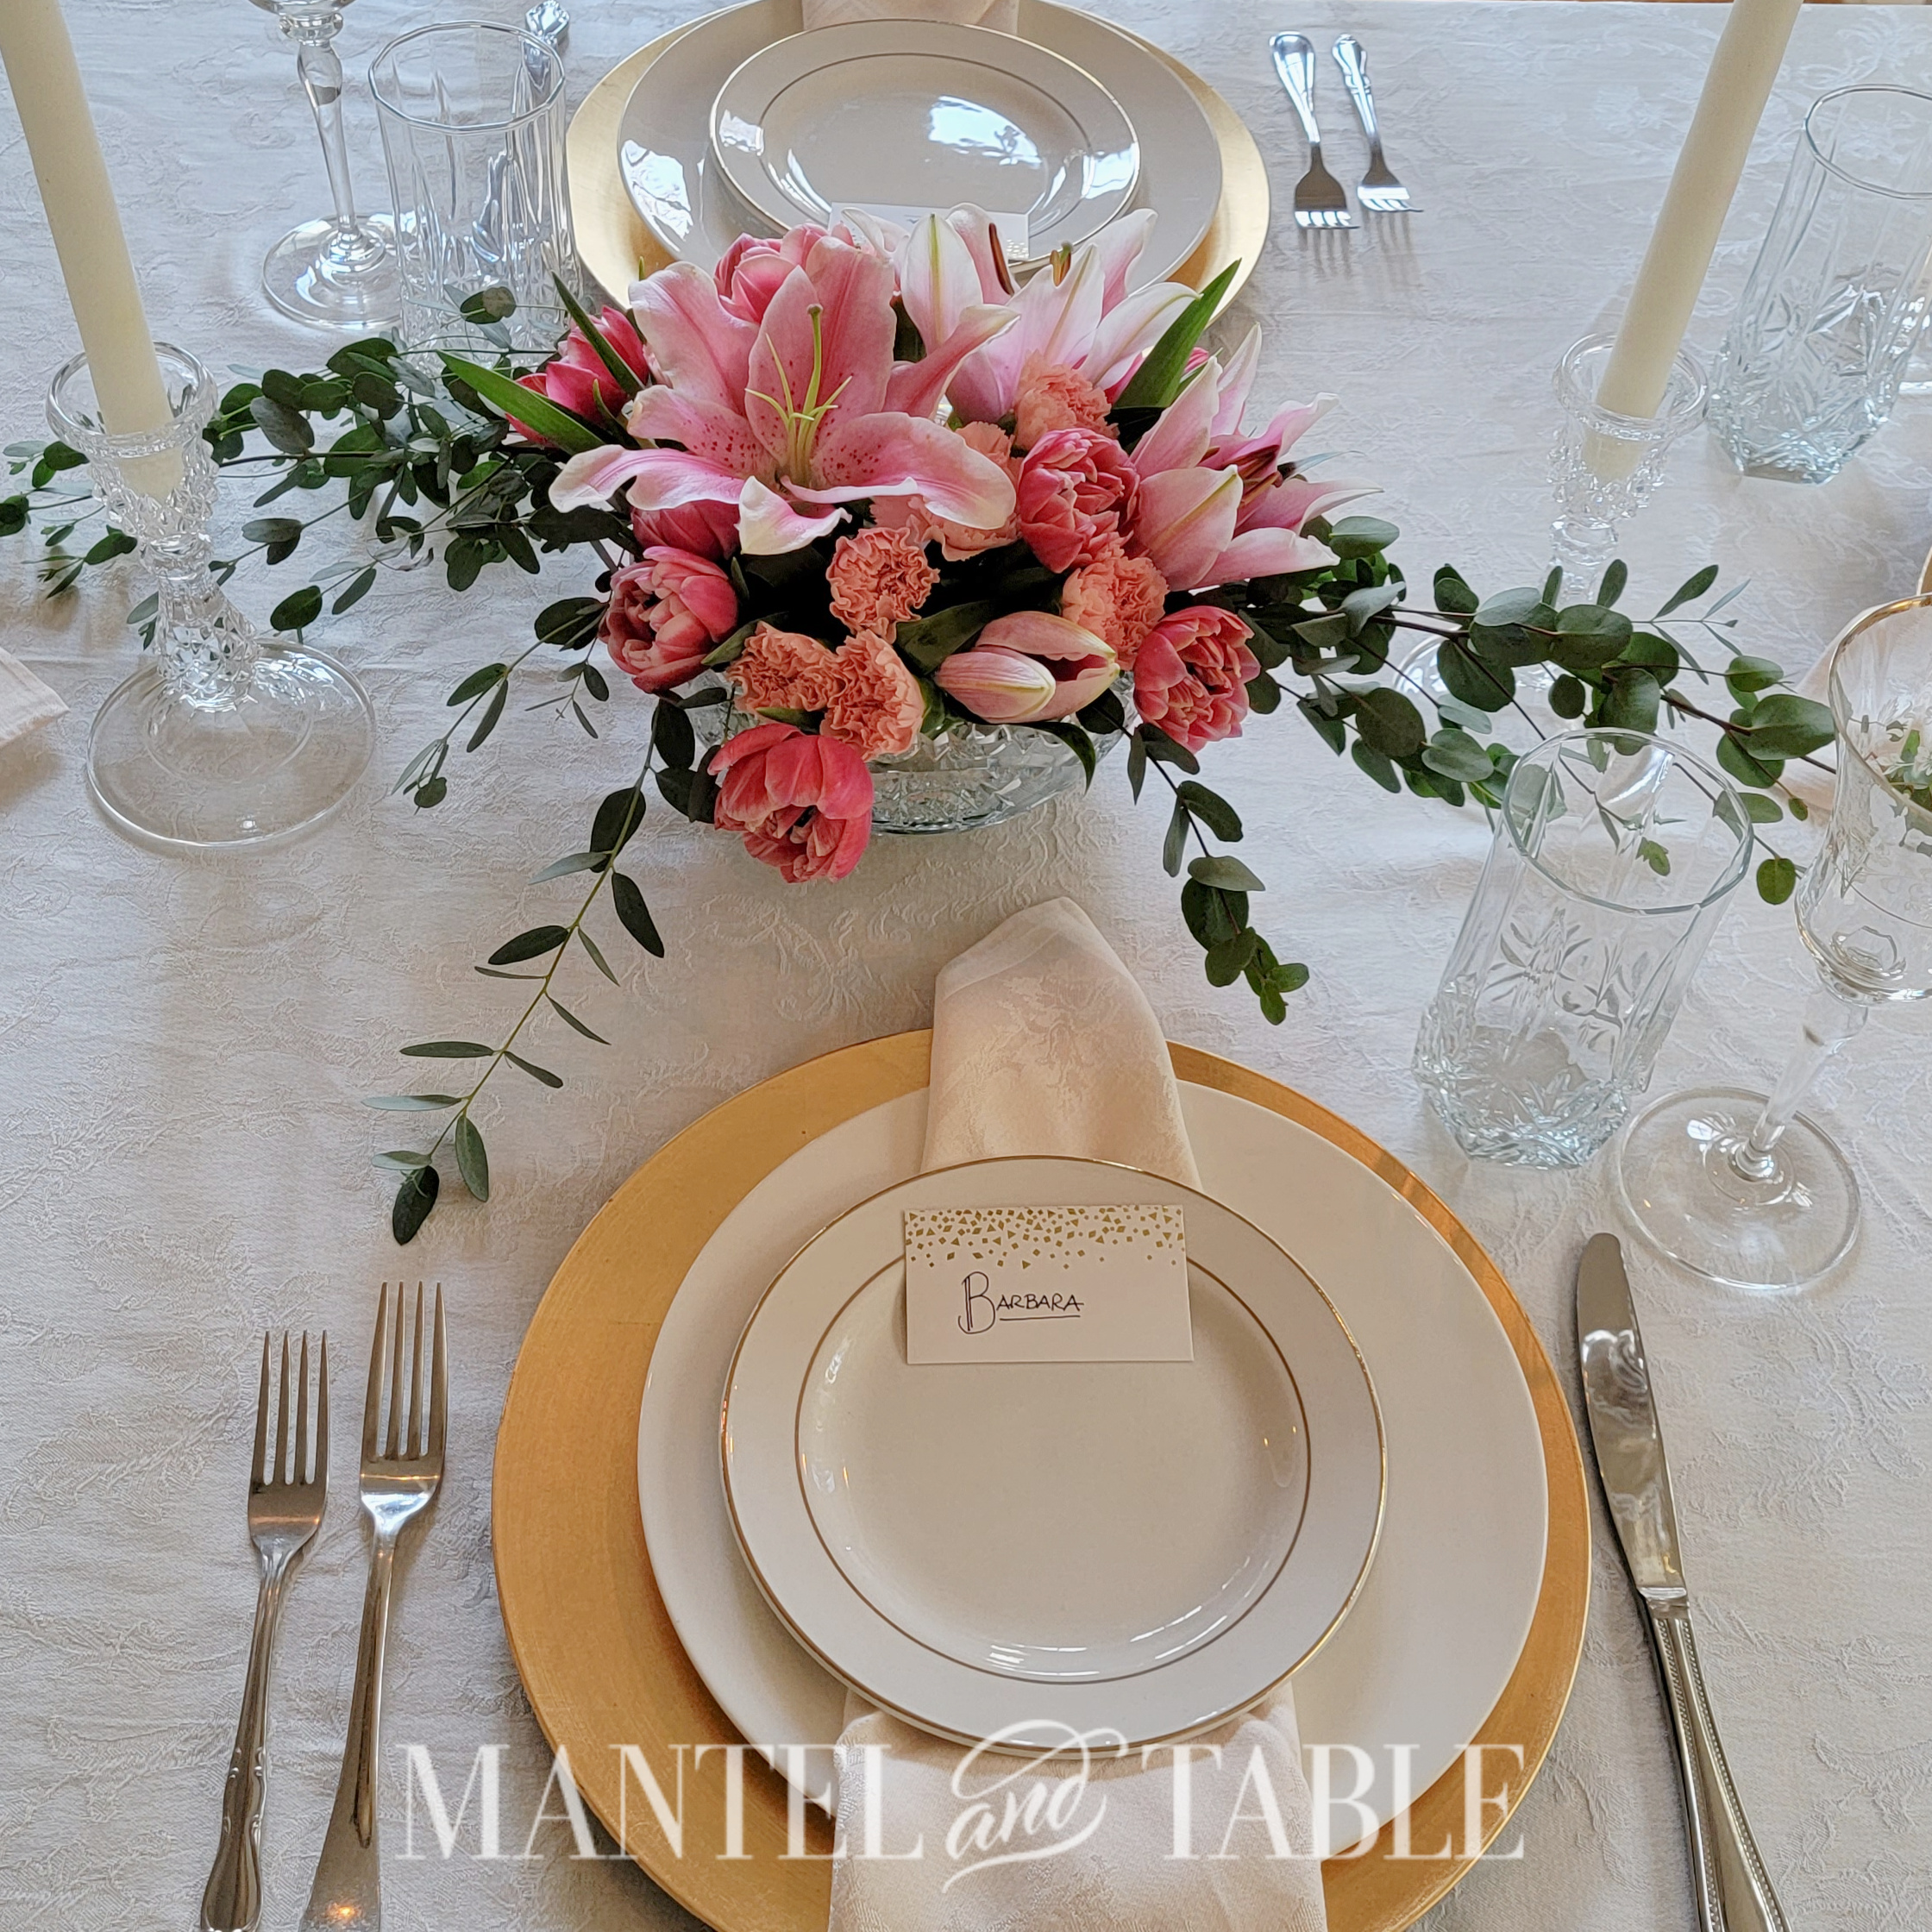 Simple Valentines Tablescape for an Easy Holiday - Parties With A